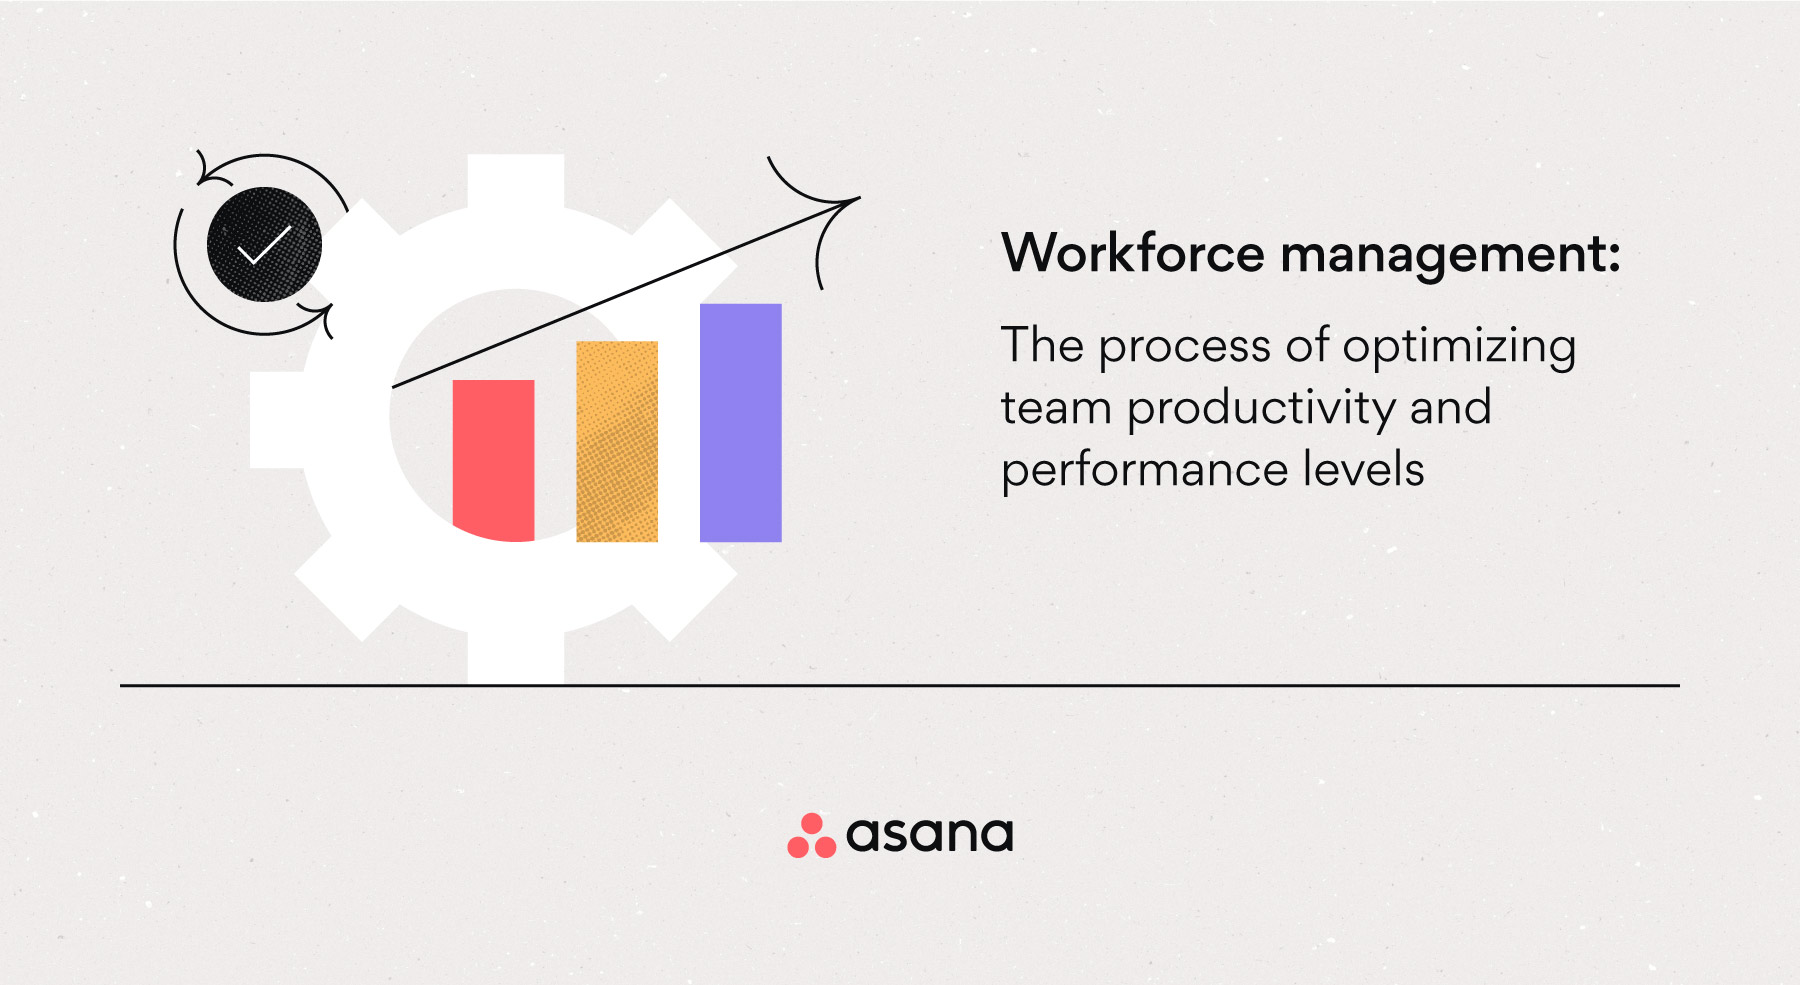 [inline illustration] What is workforce management? [infographic]